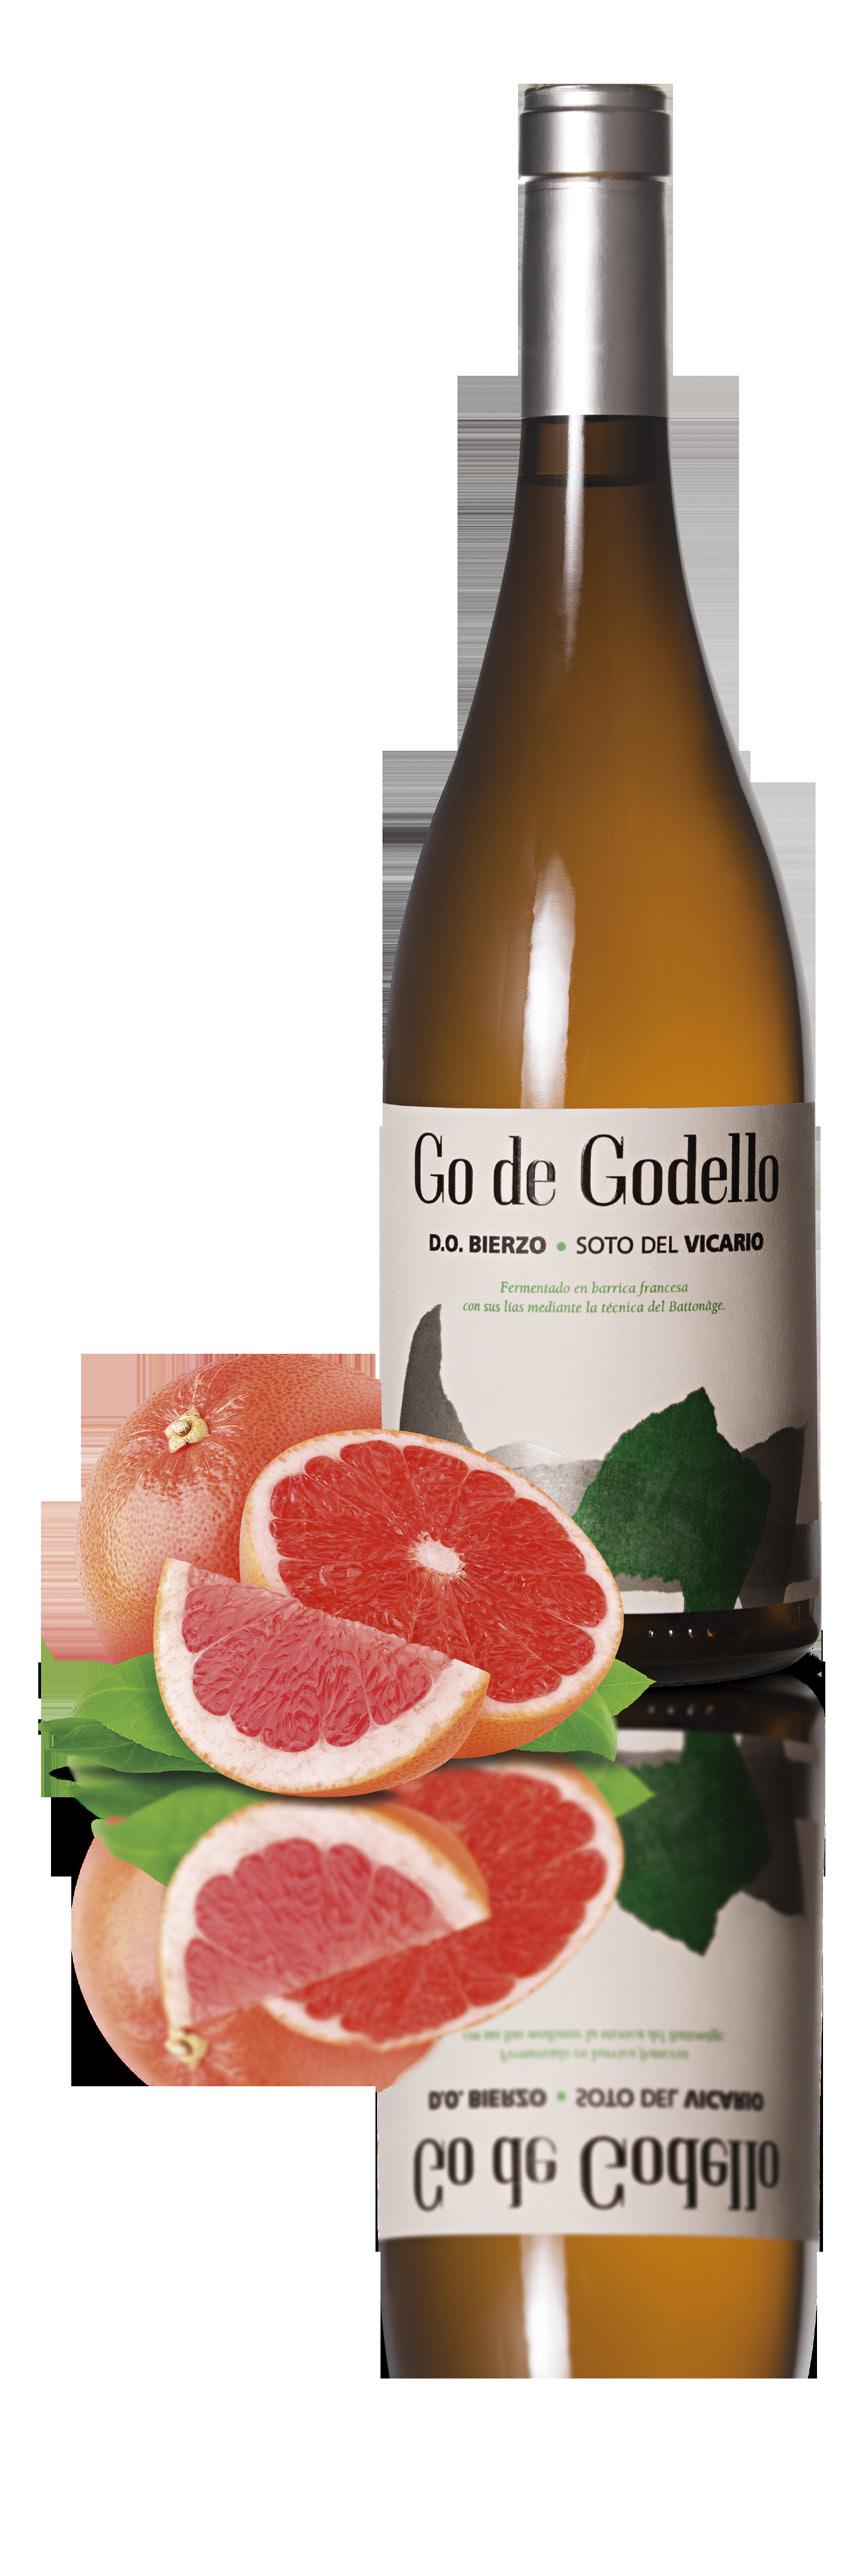 D.O. BIERZO GO DE GODELLO (100% Godello) Manually harvested on the 29th of September, 2015. White wine produced from 100% Godello grapes. Cold pre-maceration of 24 hours with partially frozen grapes.